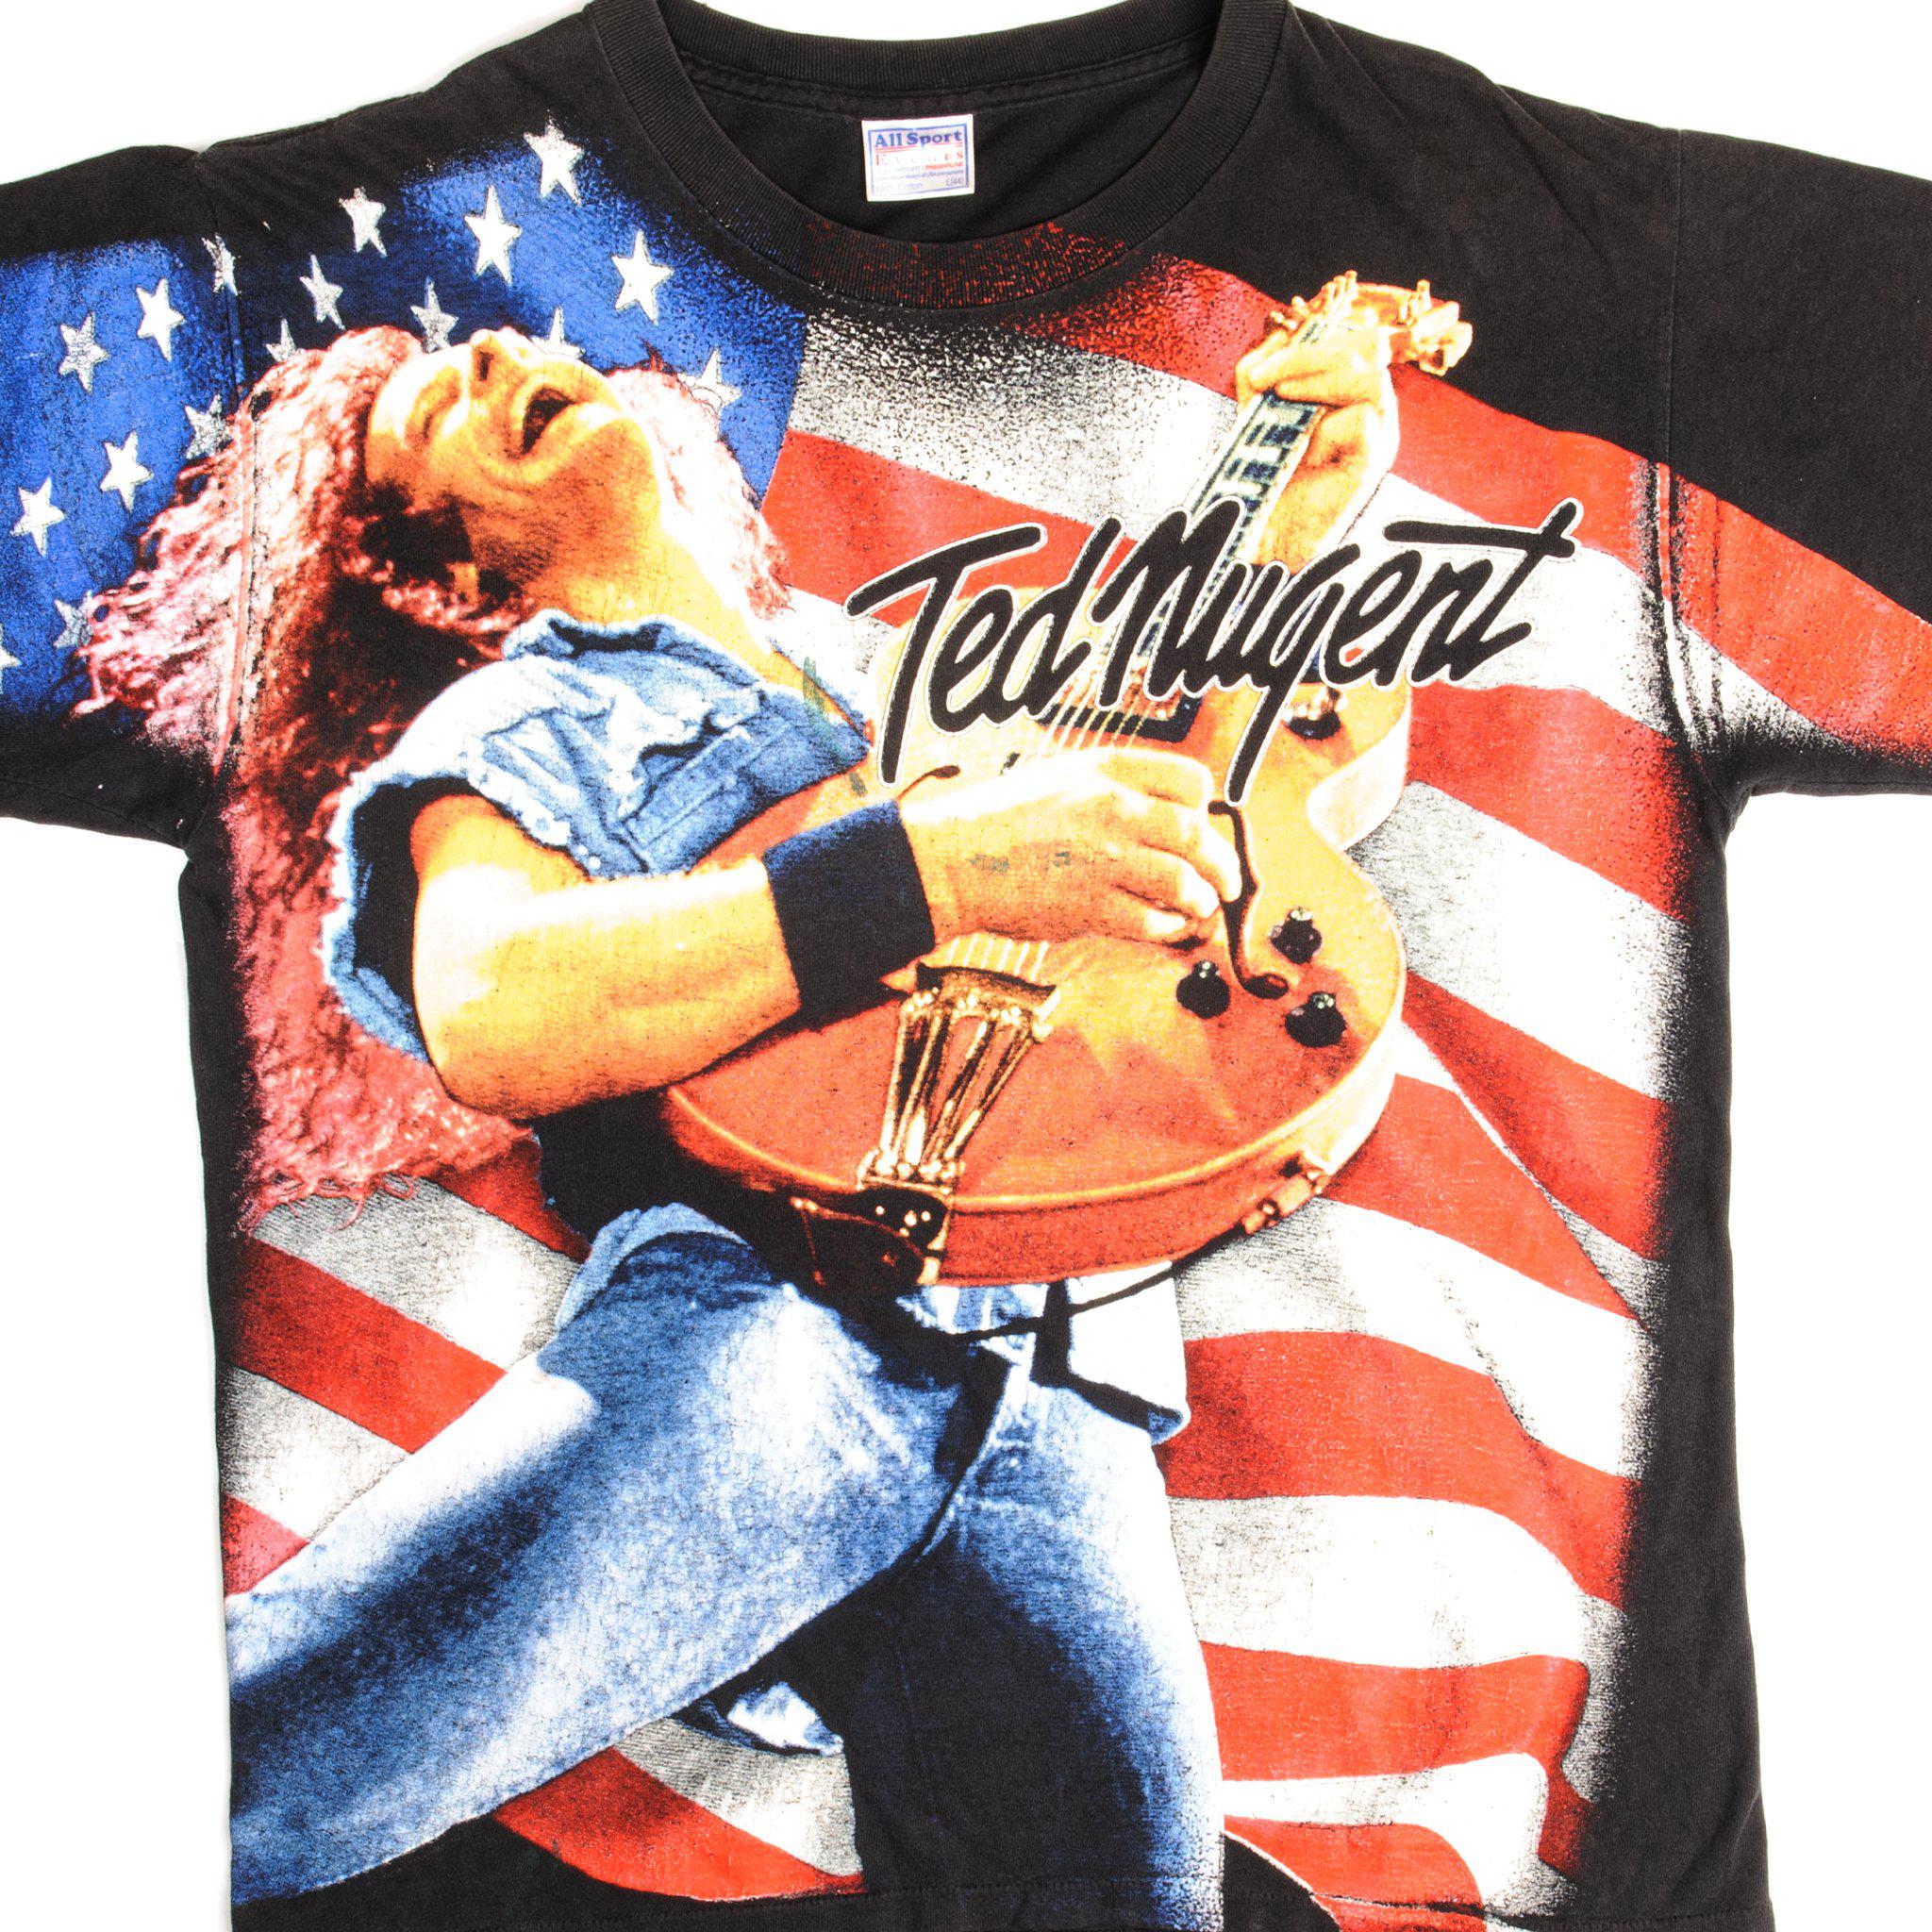 VINTAGE TED NUGENT TEE SHIRT 1990s SIZE LARGE ALL OPVER PRINT